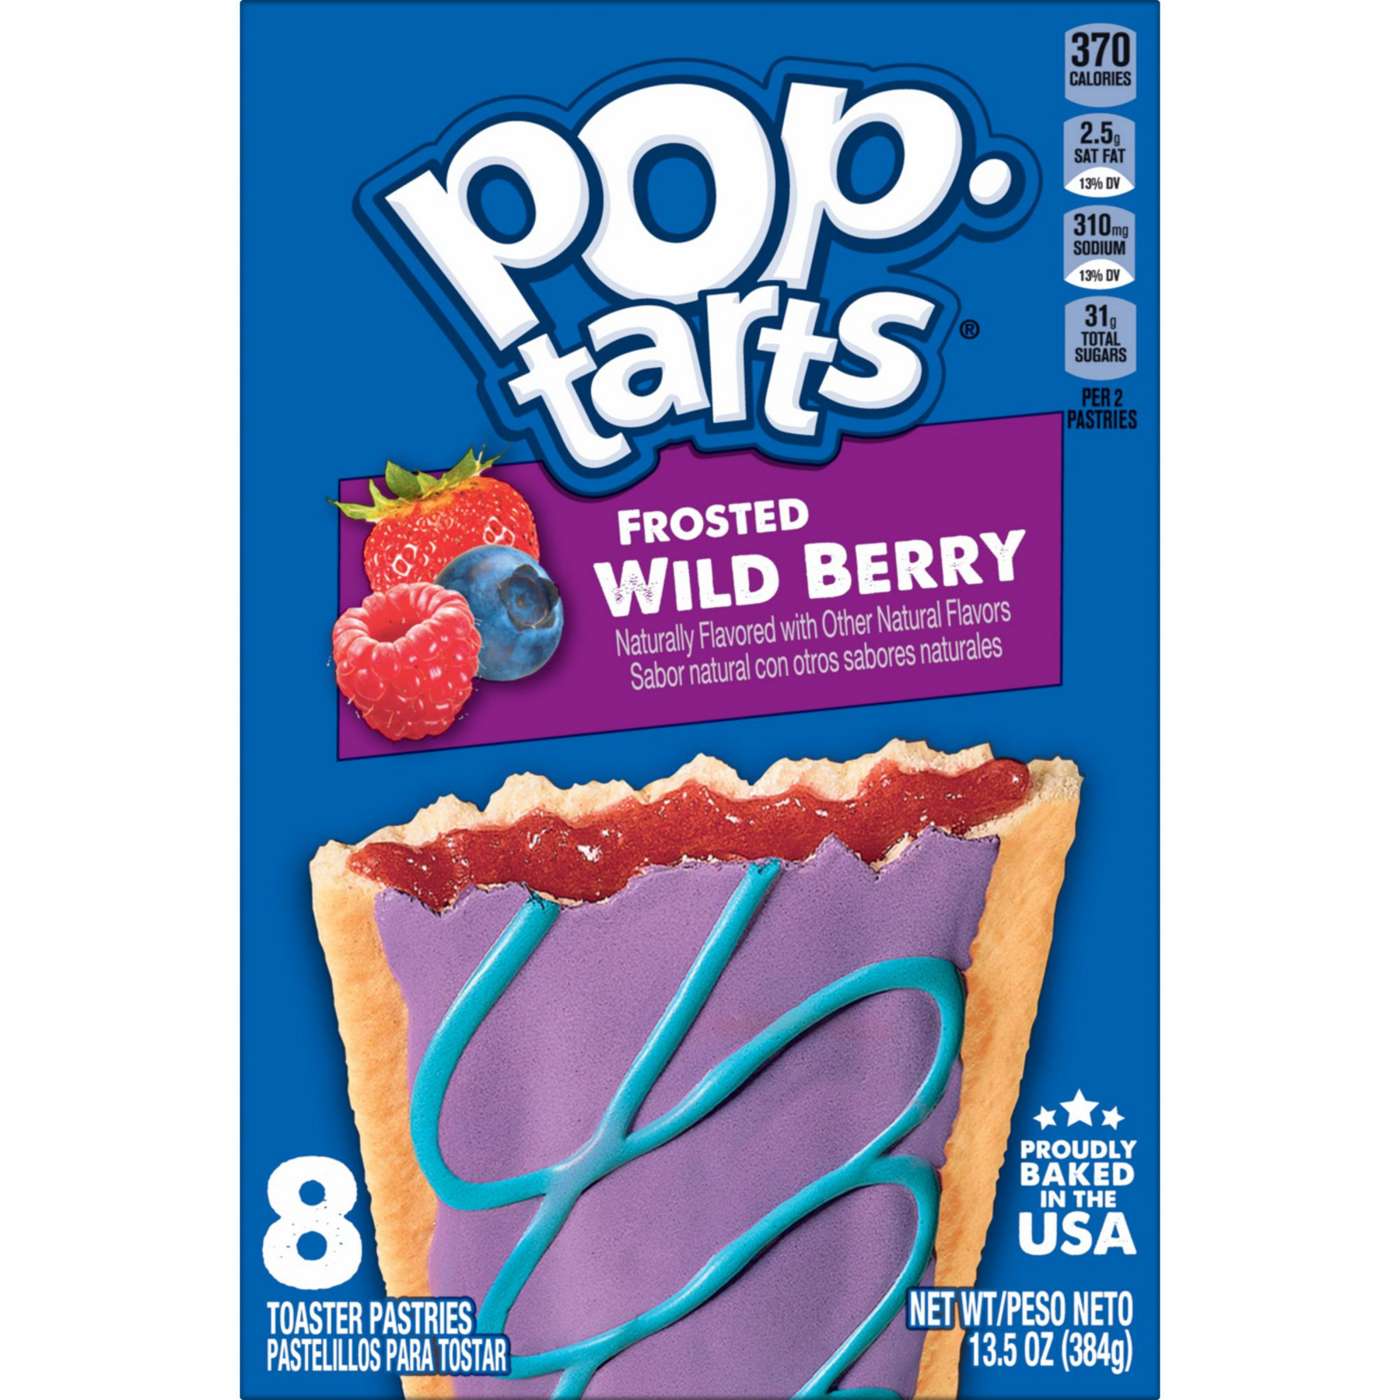 Pop-Tarts Frosted Wild Berry Toaster Pastries; image 1 of 6